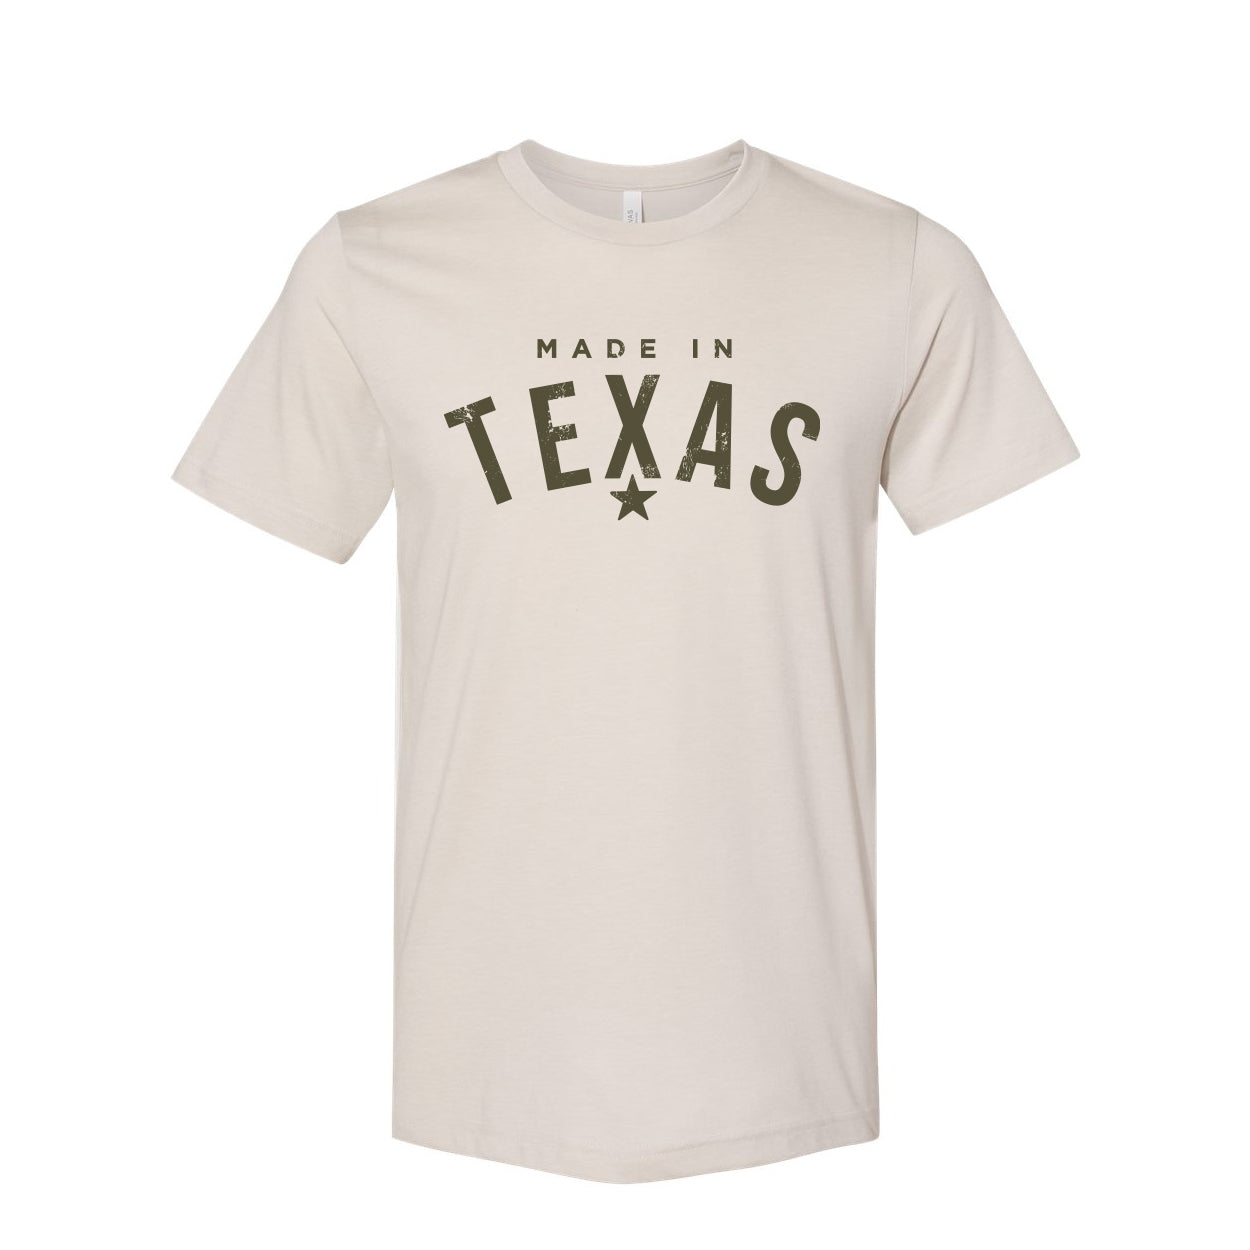 Made in Texas Co. T-Shirt